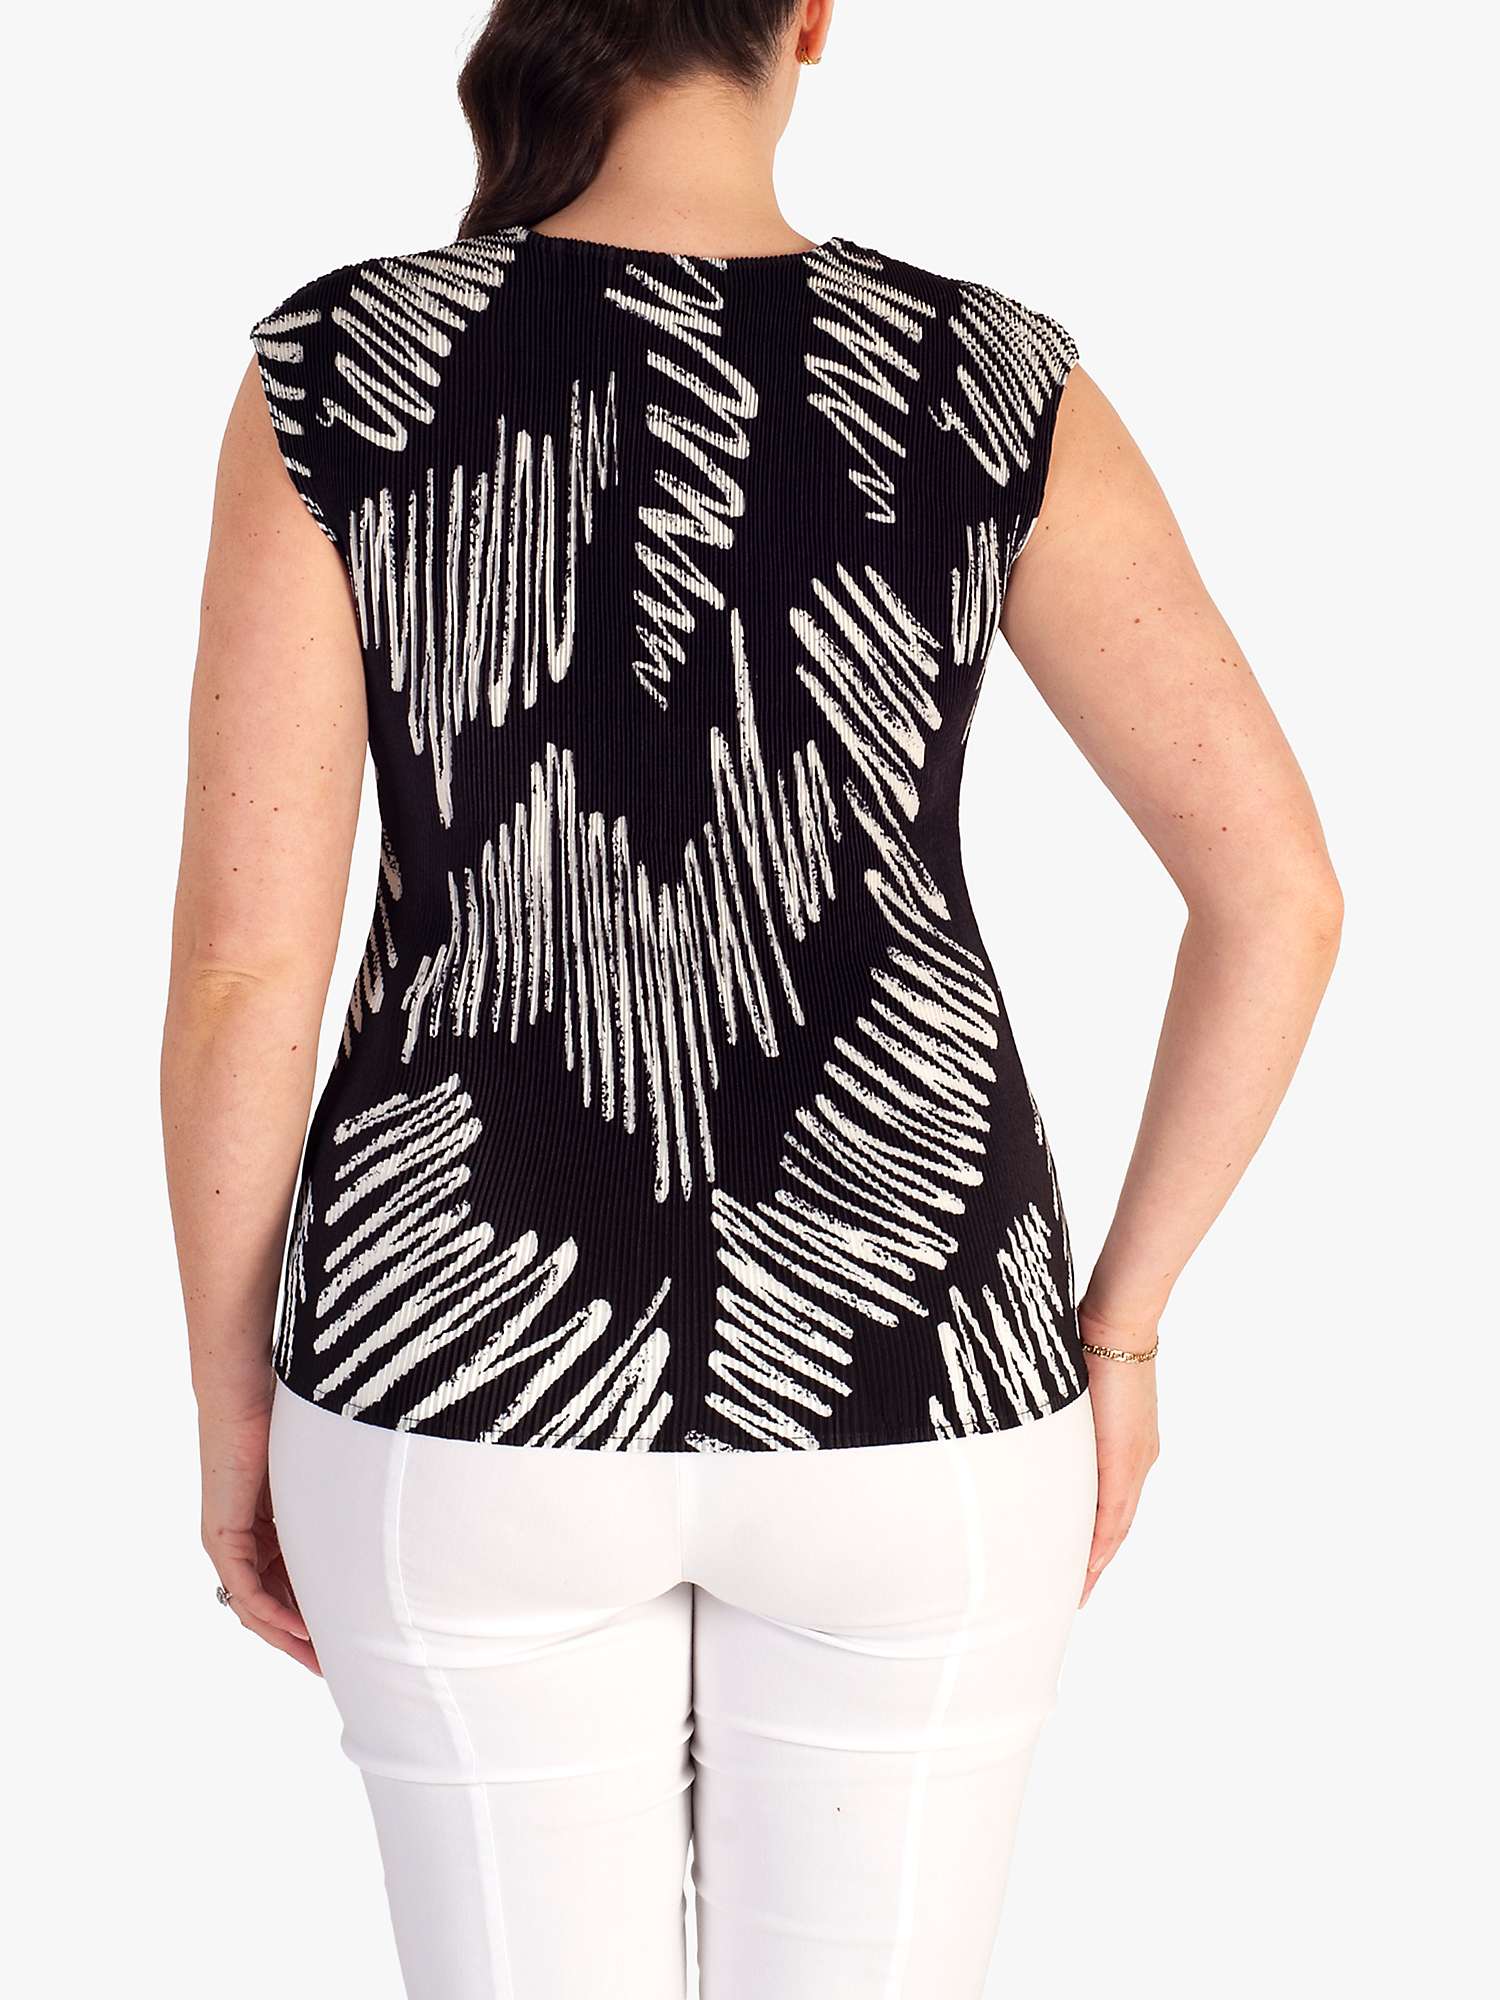 Buy chesca Scribble Textured Camisole Top, Black/White Online at johnlewis.com